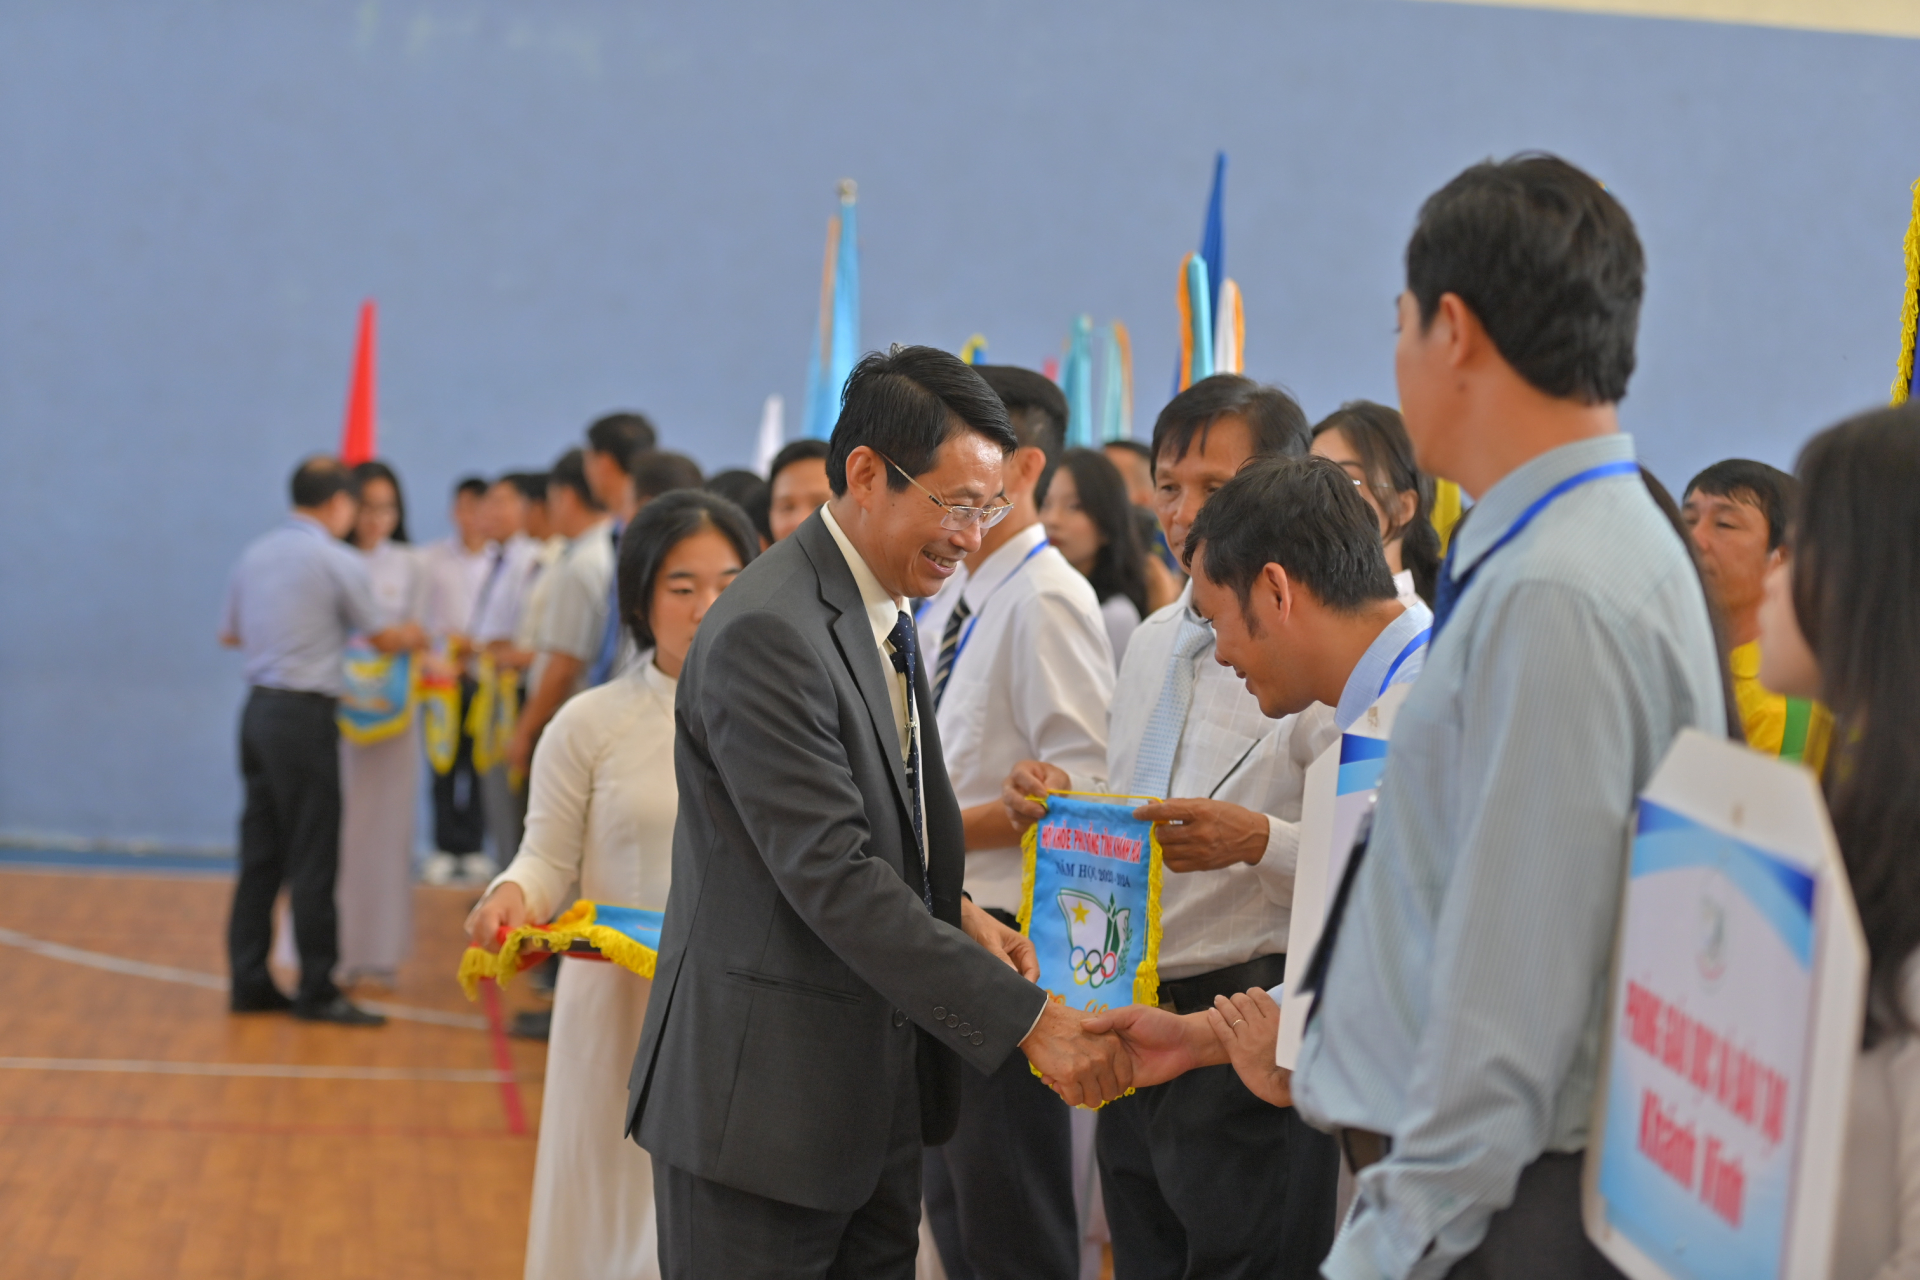 Dinh Van Thieu, Deputy Chairman of the Provincial Peoples Committee and head of the steering committee of the festival, giving souvenir flags to the participating teams

